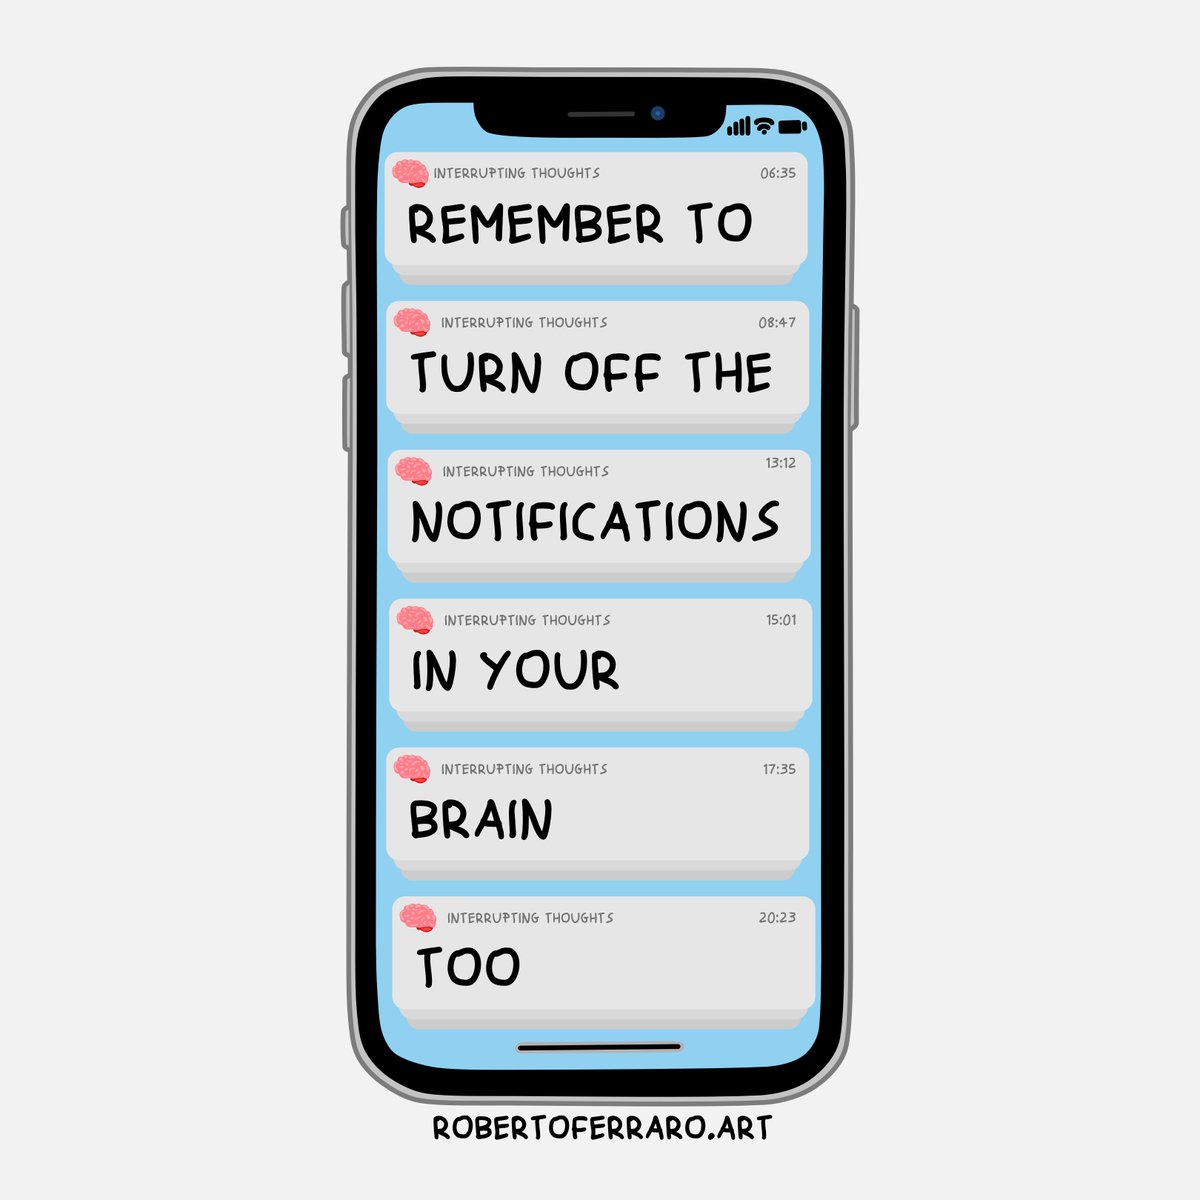 Remember to turn off the notifications in your mind too. Inspired by Addy Osmani